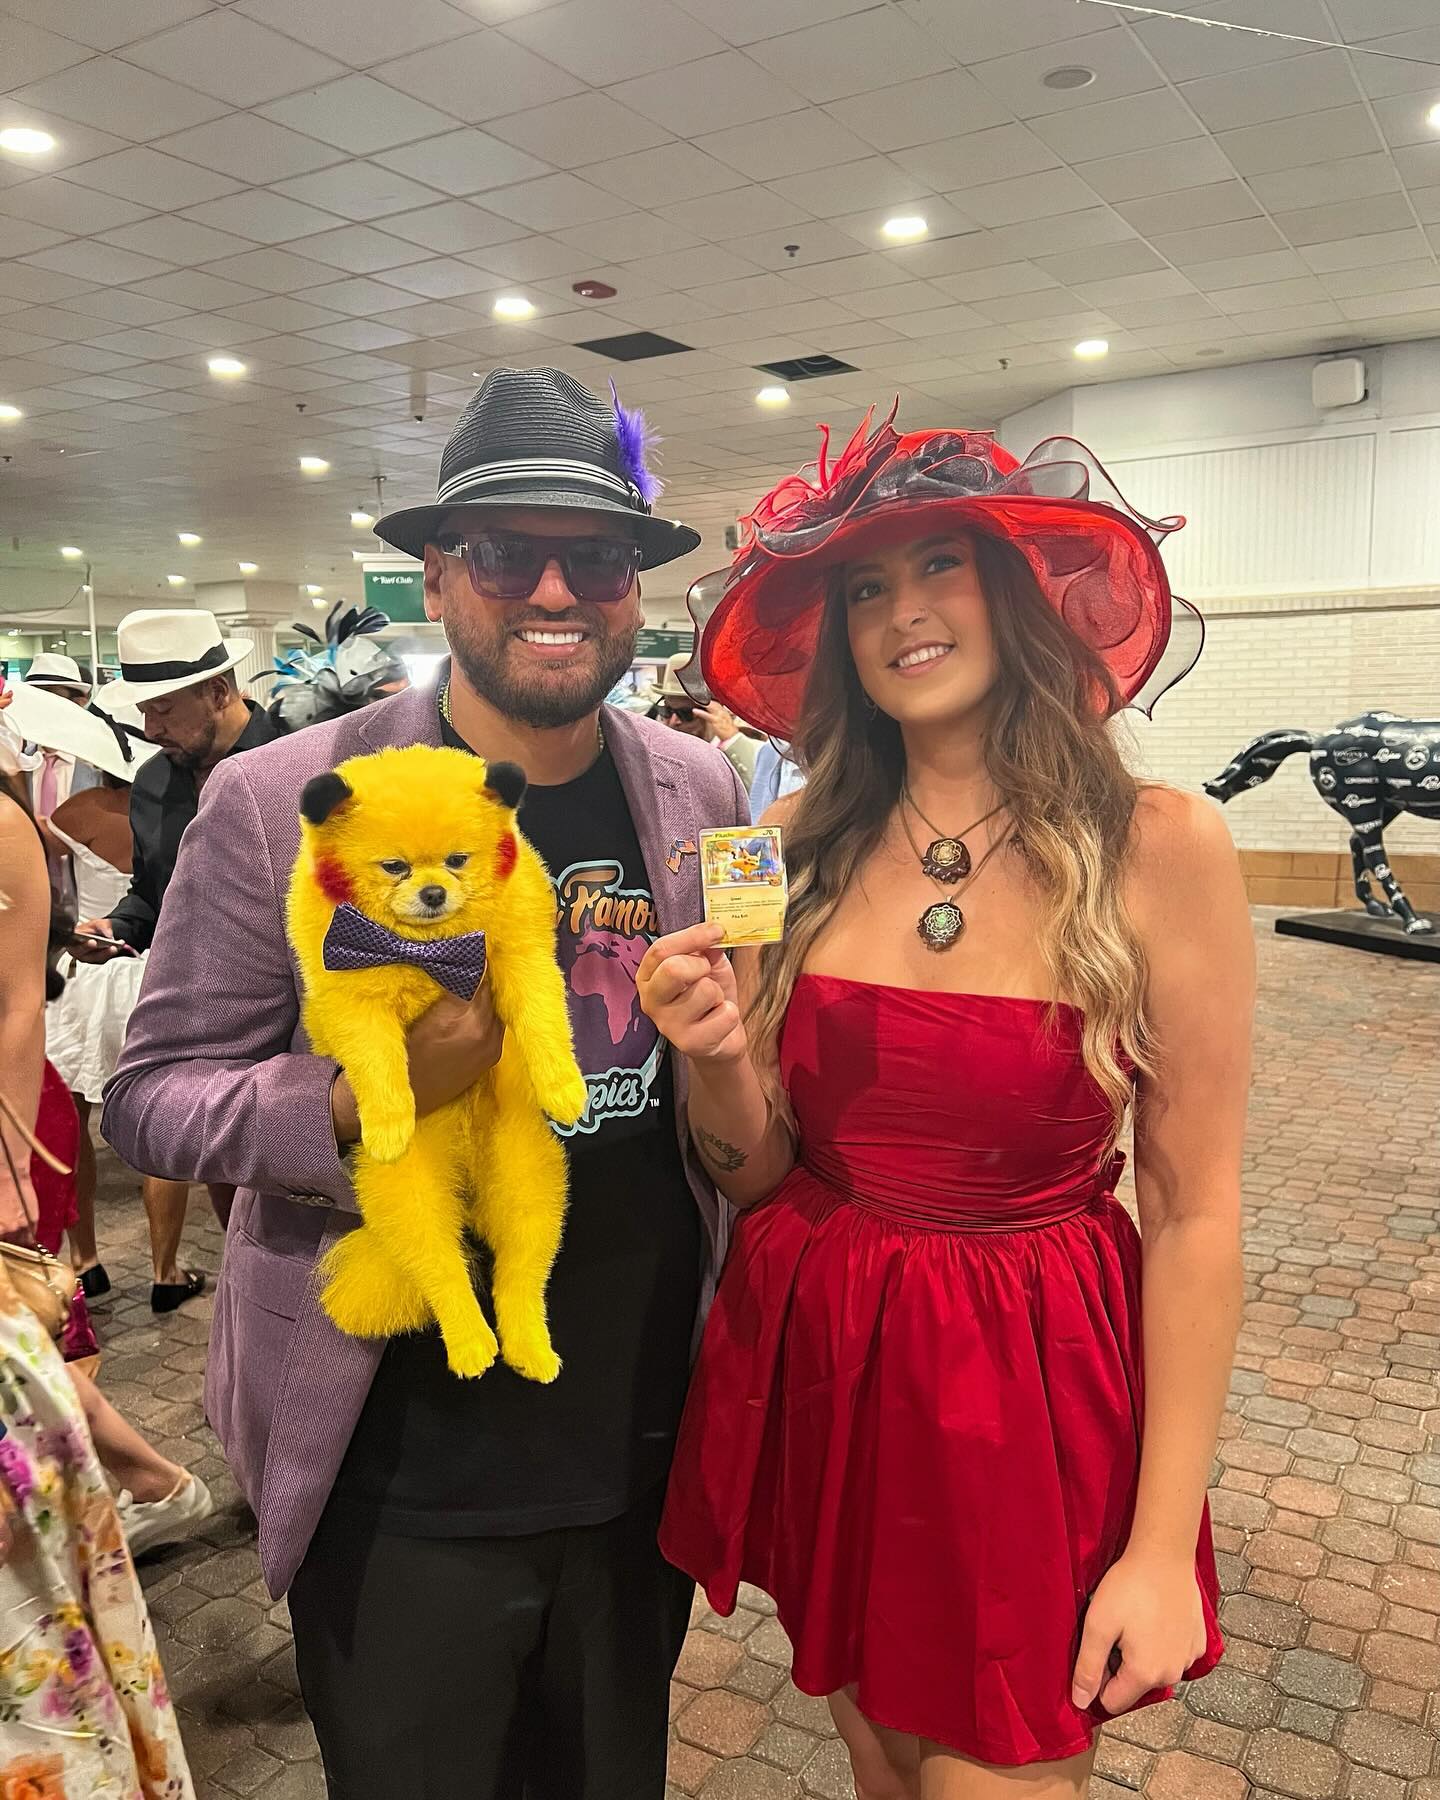 Giddyup!!! (Ft the guy with the pika pup that i gave a shiny pikachu card to 🥹) 🐎🐎
•
•
•
•
#derby #kentuckyderby #derbyday #louisville #stl #horseracing #derbyhats #derbyday #derbyfashion